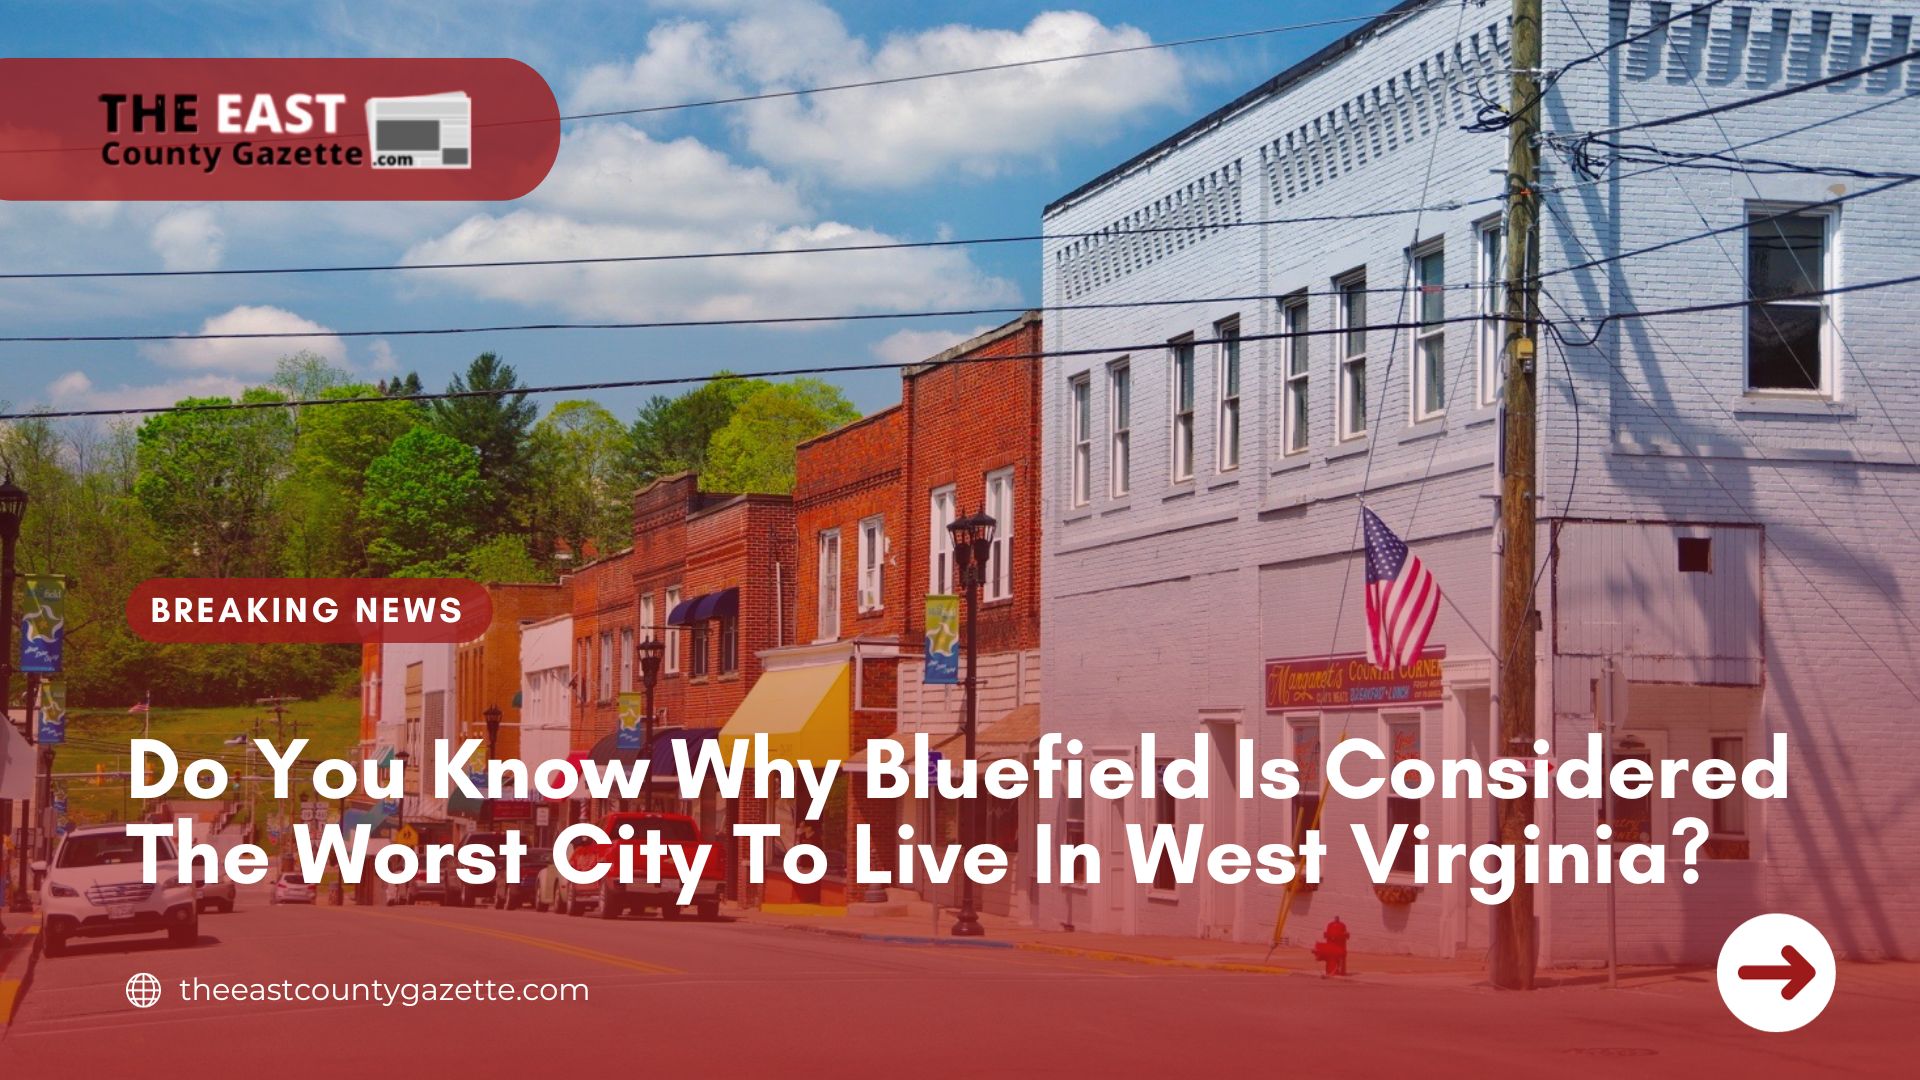 Do You Know Why Bluefield Is Considered The Worst City To Live In West Virginia?